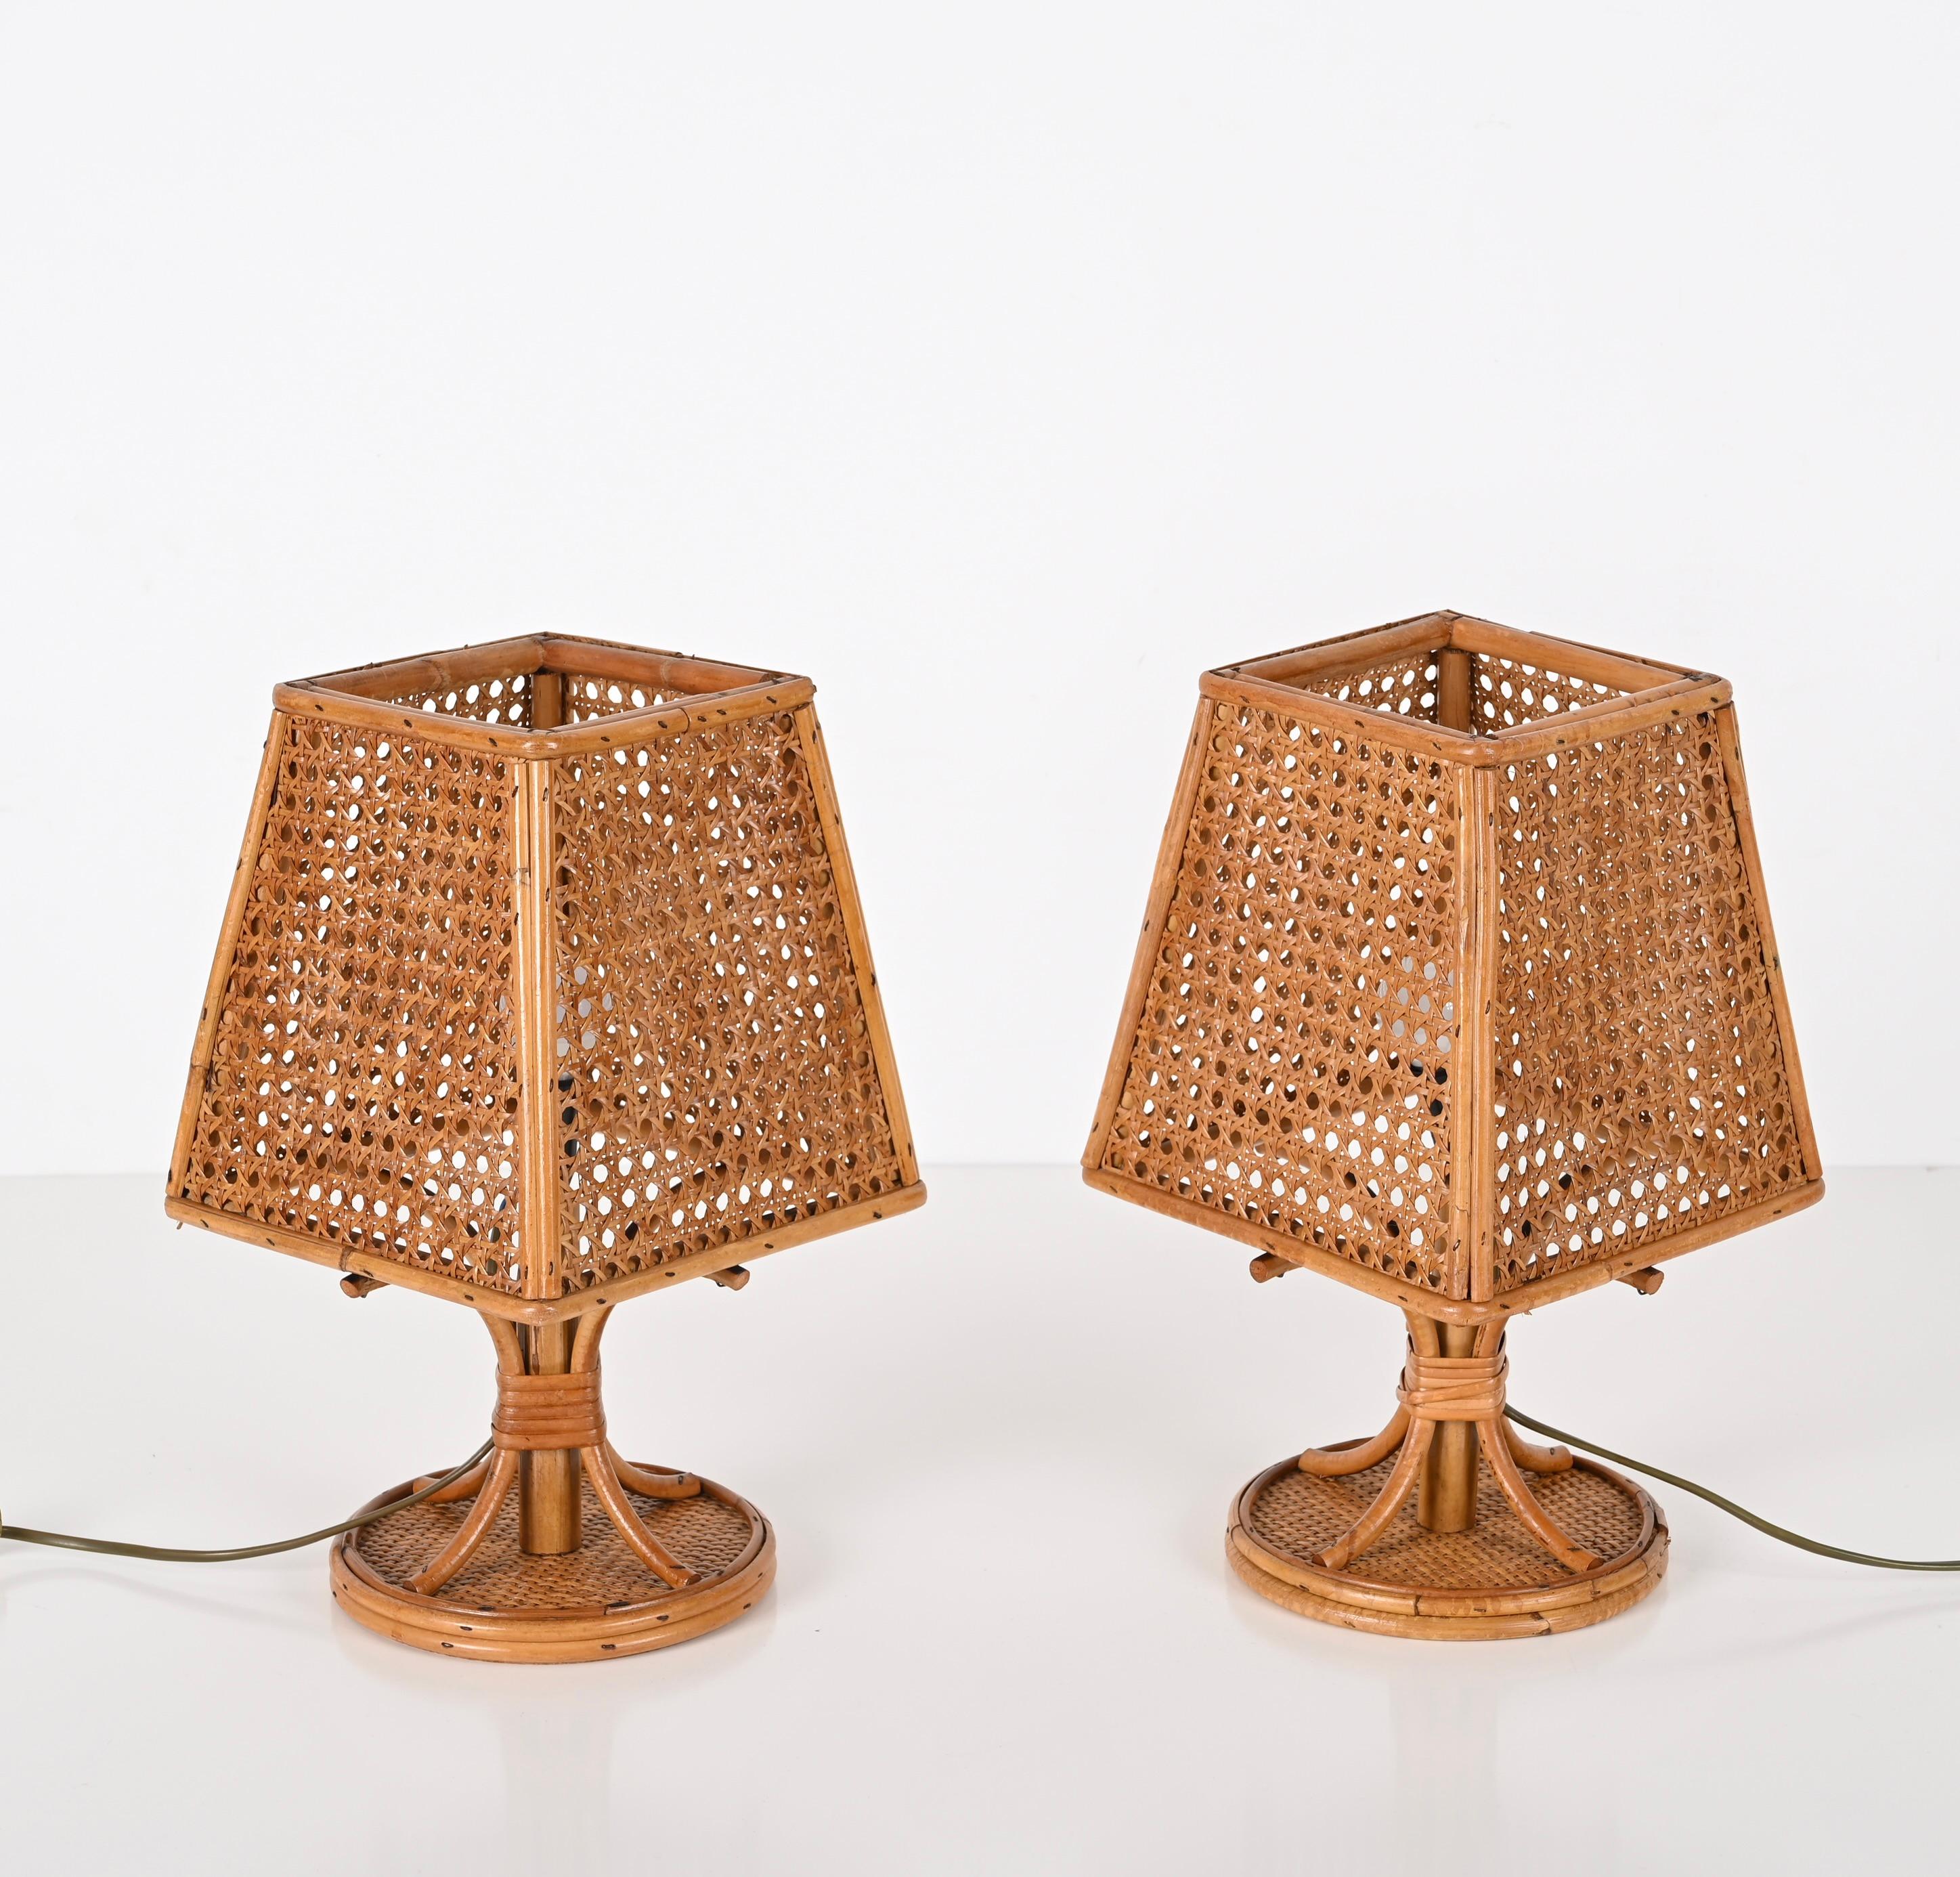 20th Century Pair of French Riviera Table Lamps in Wicker and Rattan, Italy 1960s